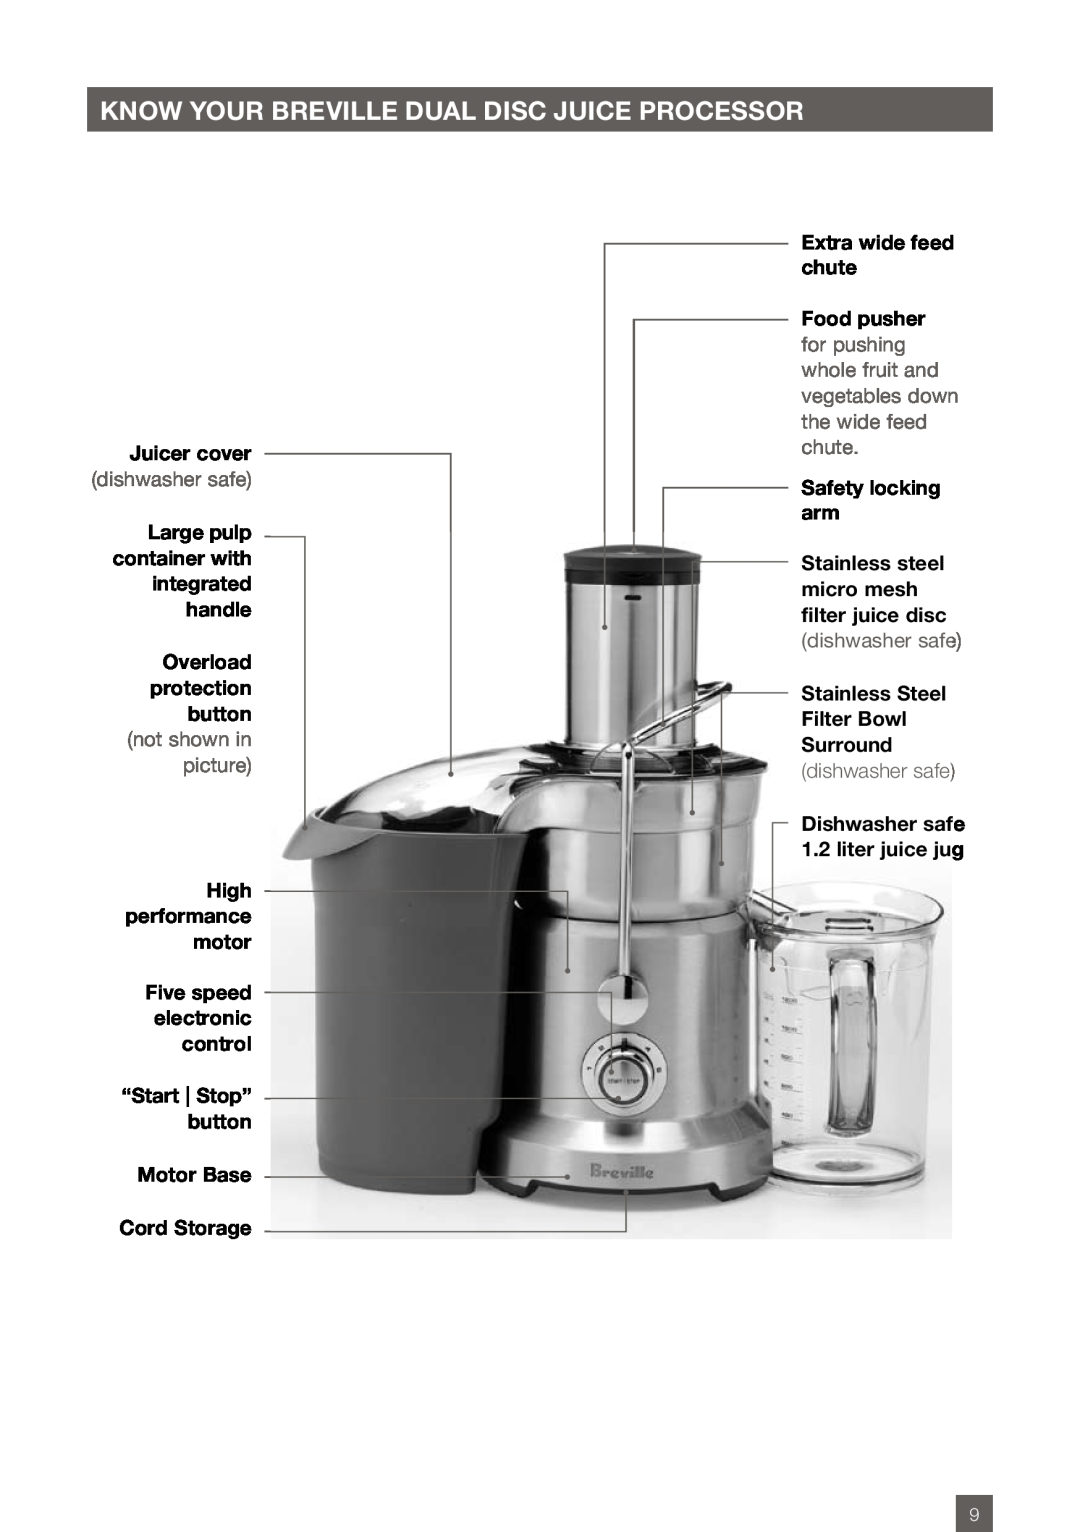 Breville BJE820XL KNOW YOUR BREVILLE Dual disc juice processor, Juicer cover, dishwasher safe, Overload protection button 